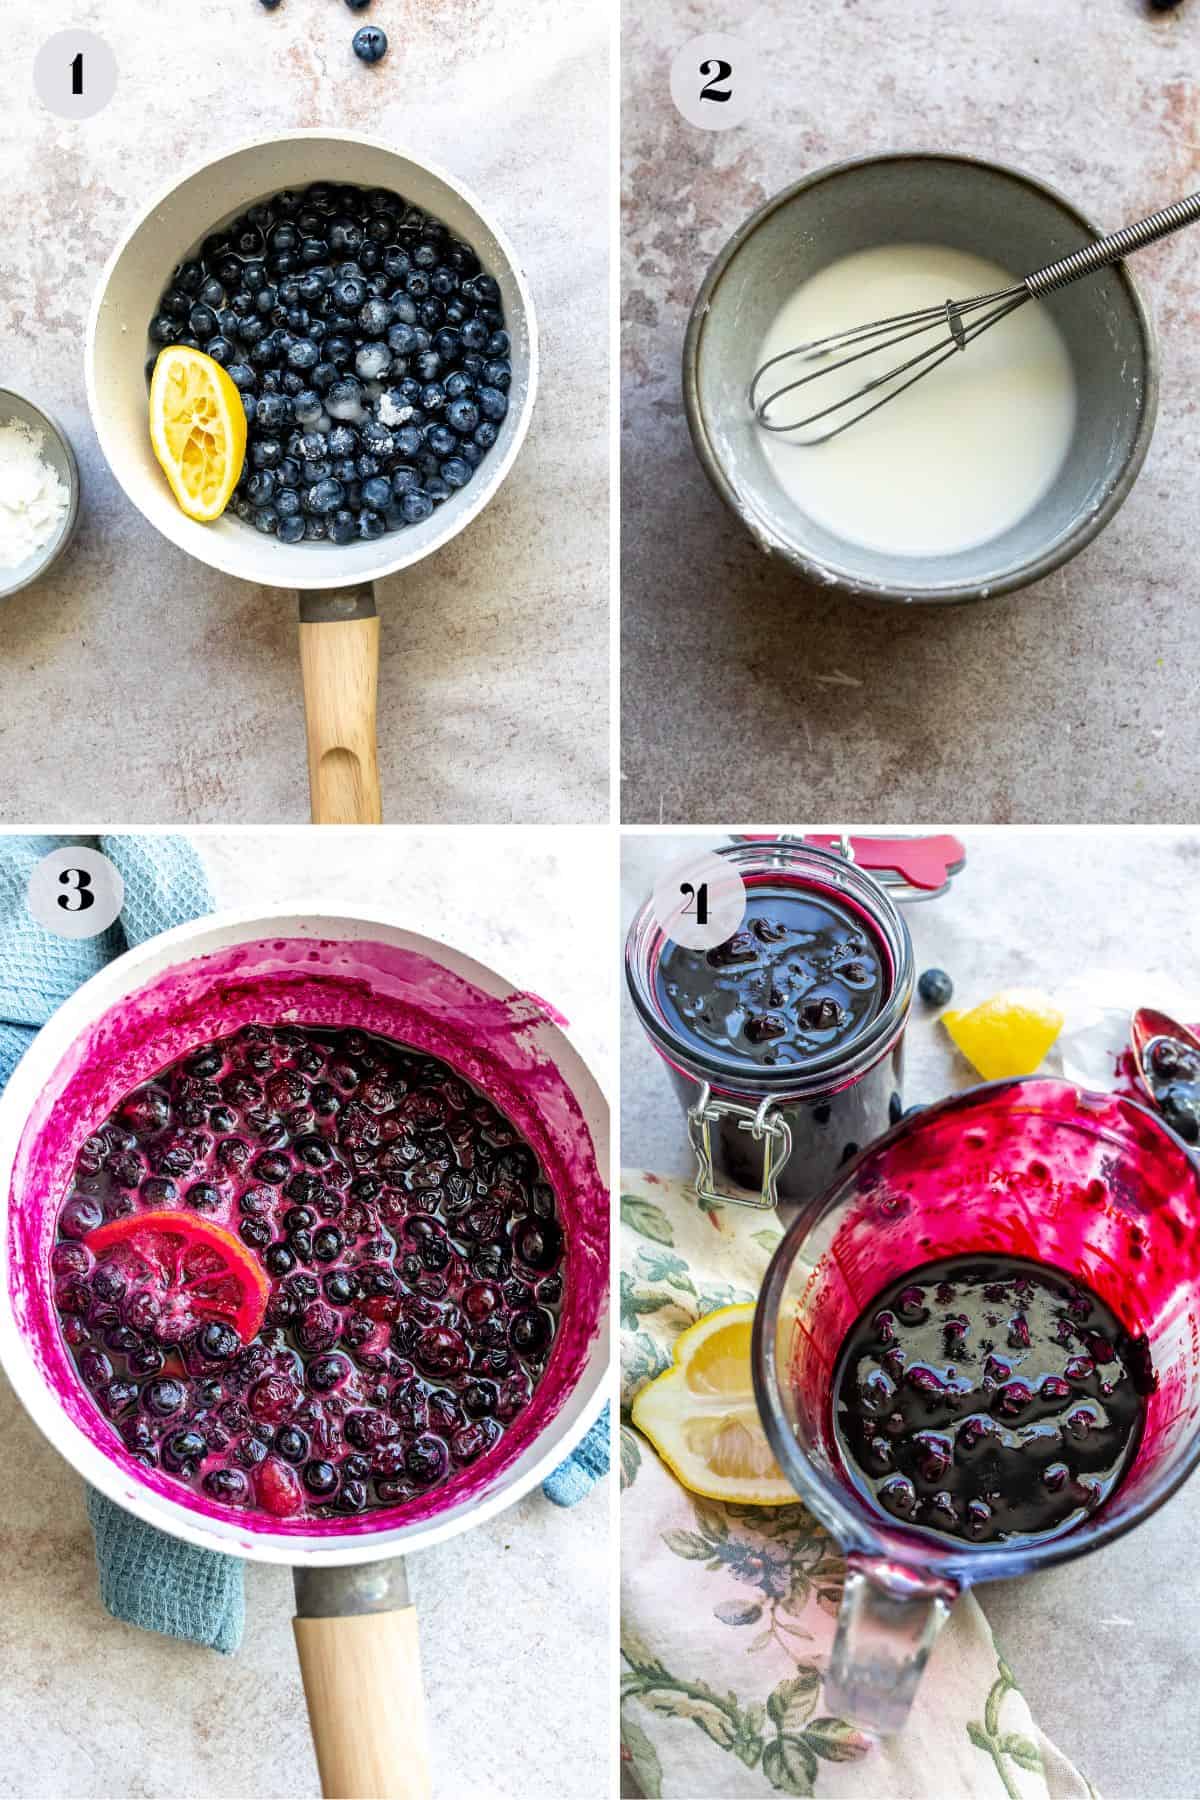 An image of the process of cooking blueberries to make syrup.